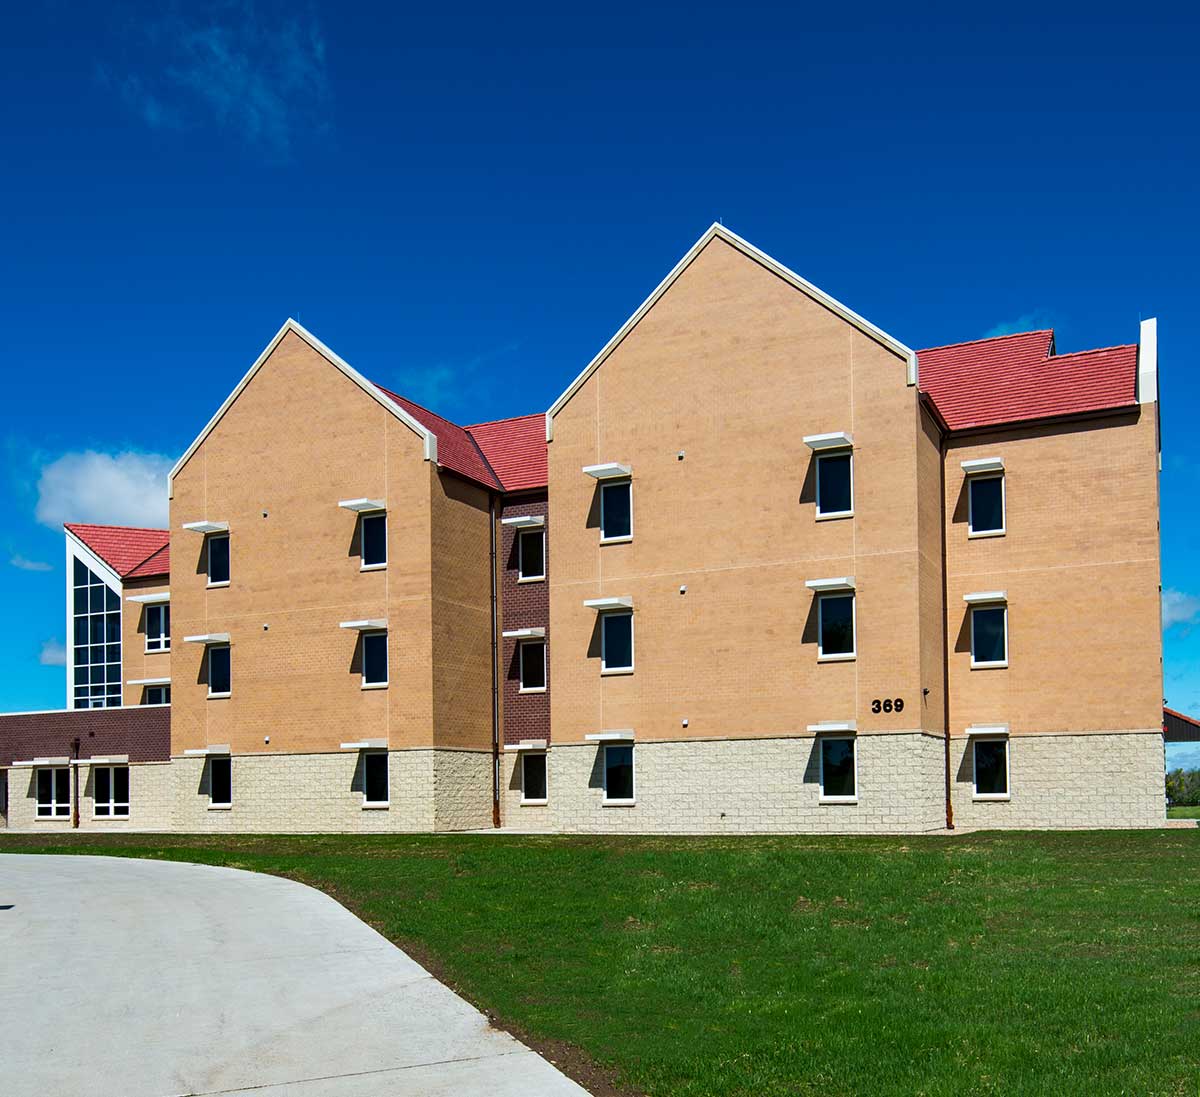 Offutt Airforce Base Dormitory